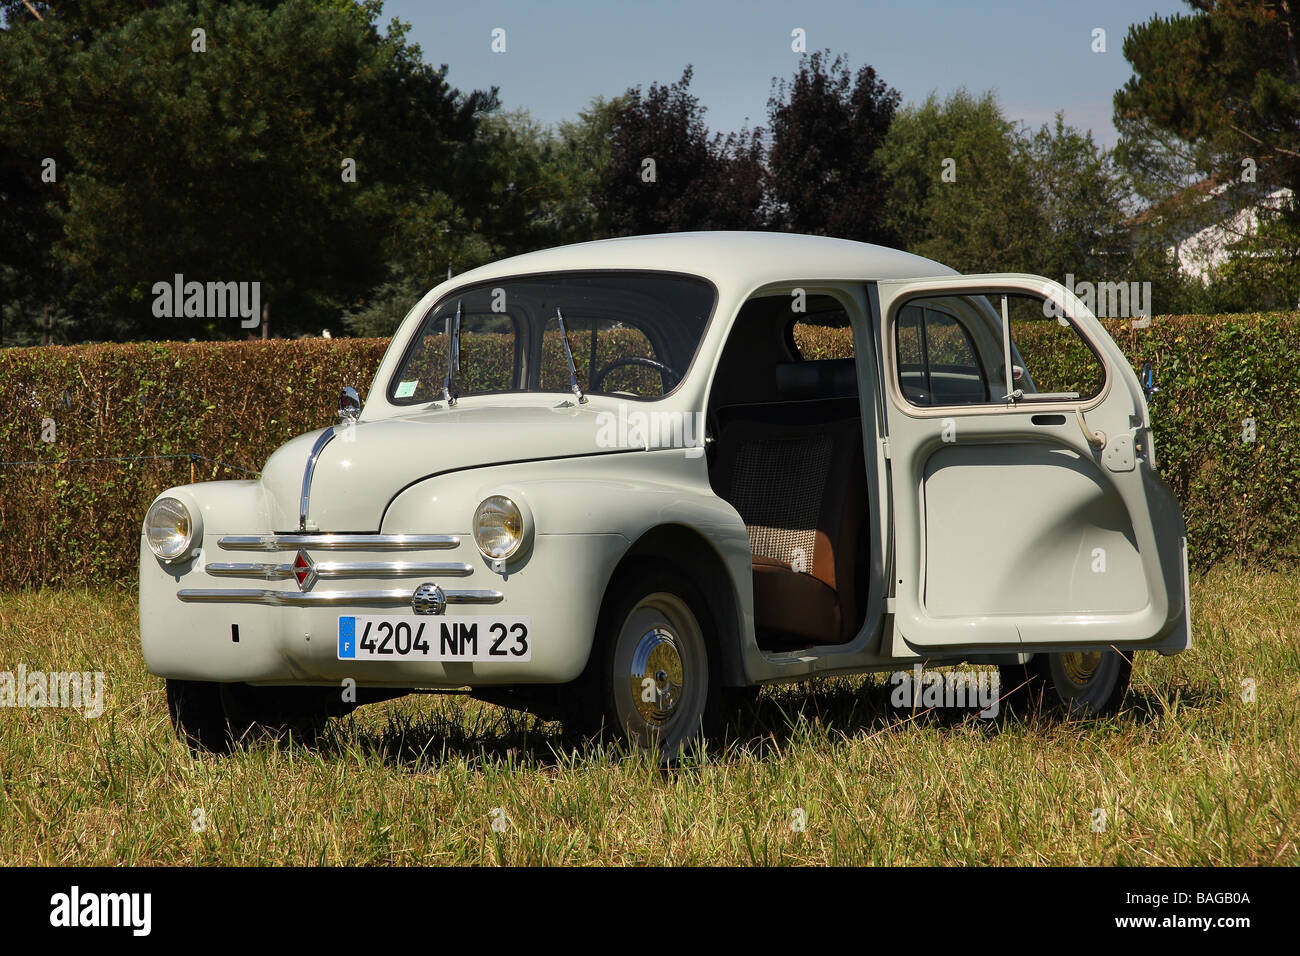 A well restored 1961 Renault 4cv modele affair in a field Drivers door open  747cc 3 speed Limousin France Stock Photo - Alamy